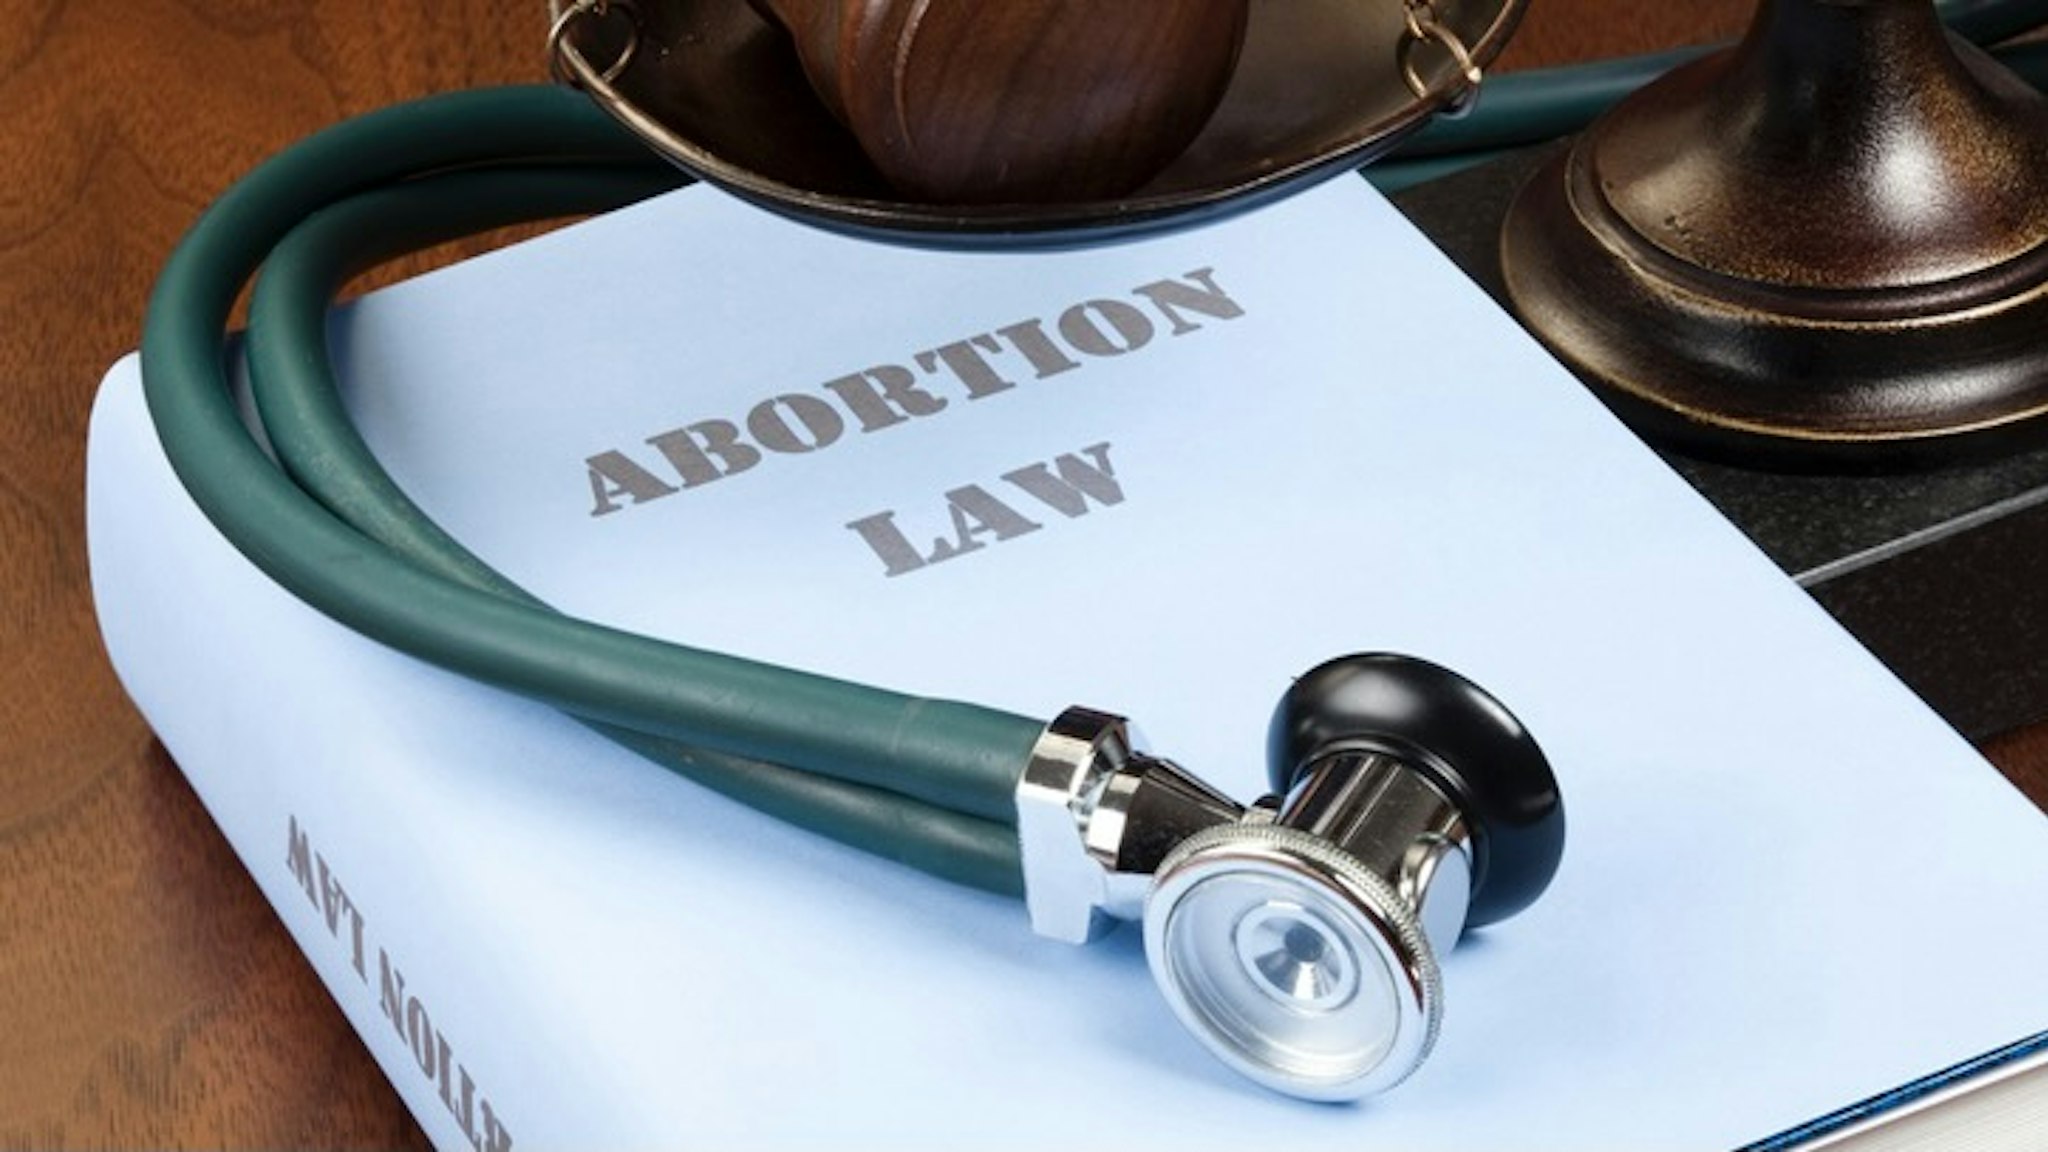 Abortion law - stock photo "Concept shot. Gavel, stethoscope and scale of justice next to Abortion Law book." ericsphotography via Getty Images